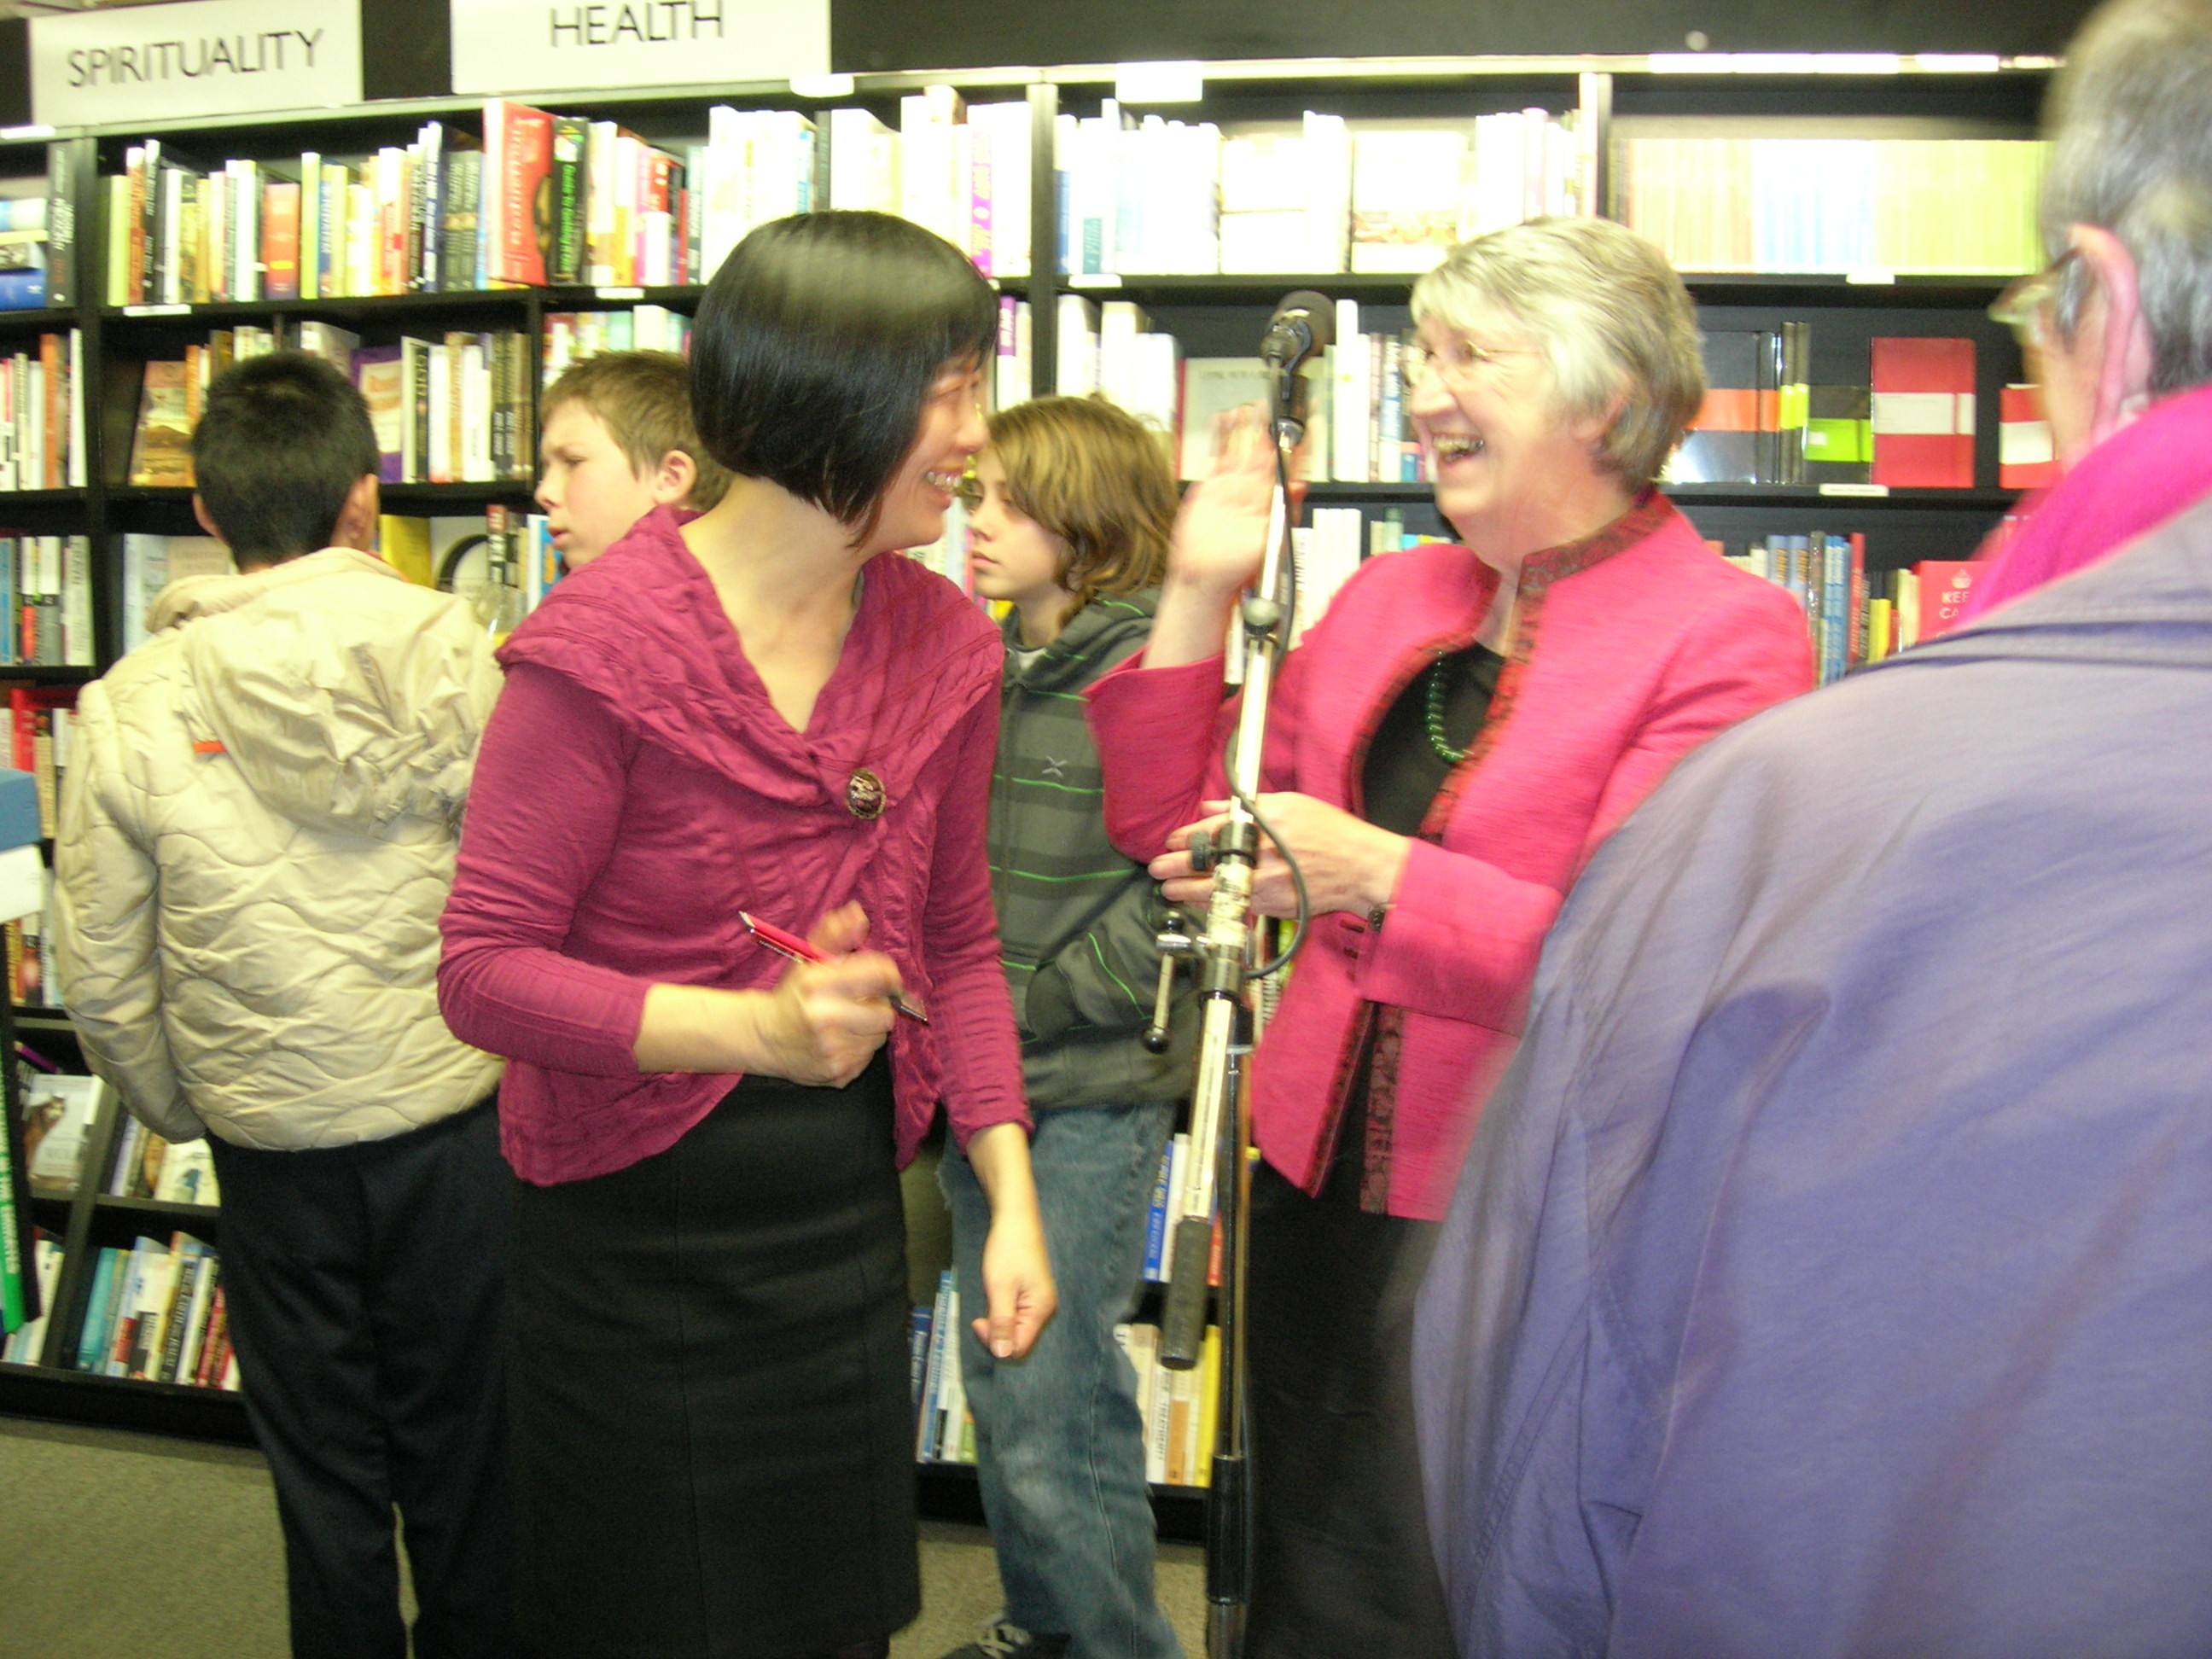 Two women with pink tops laughing with one another